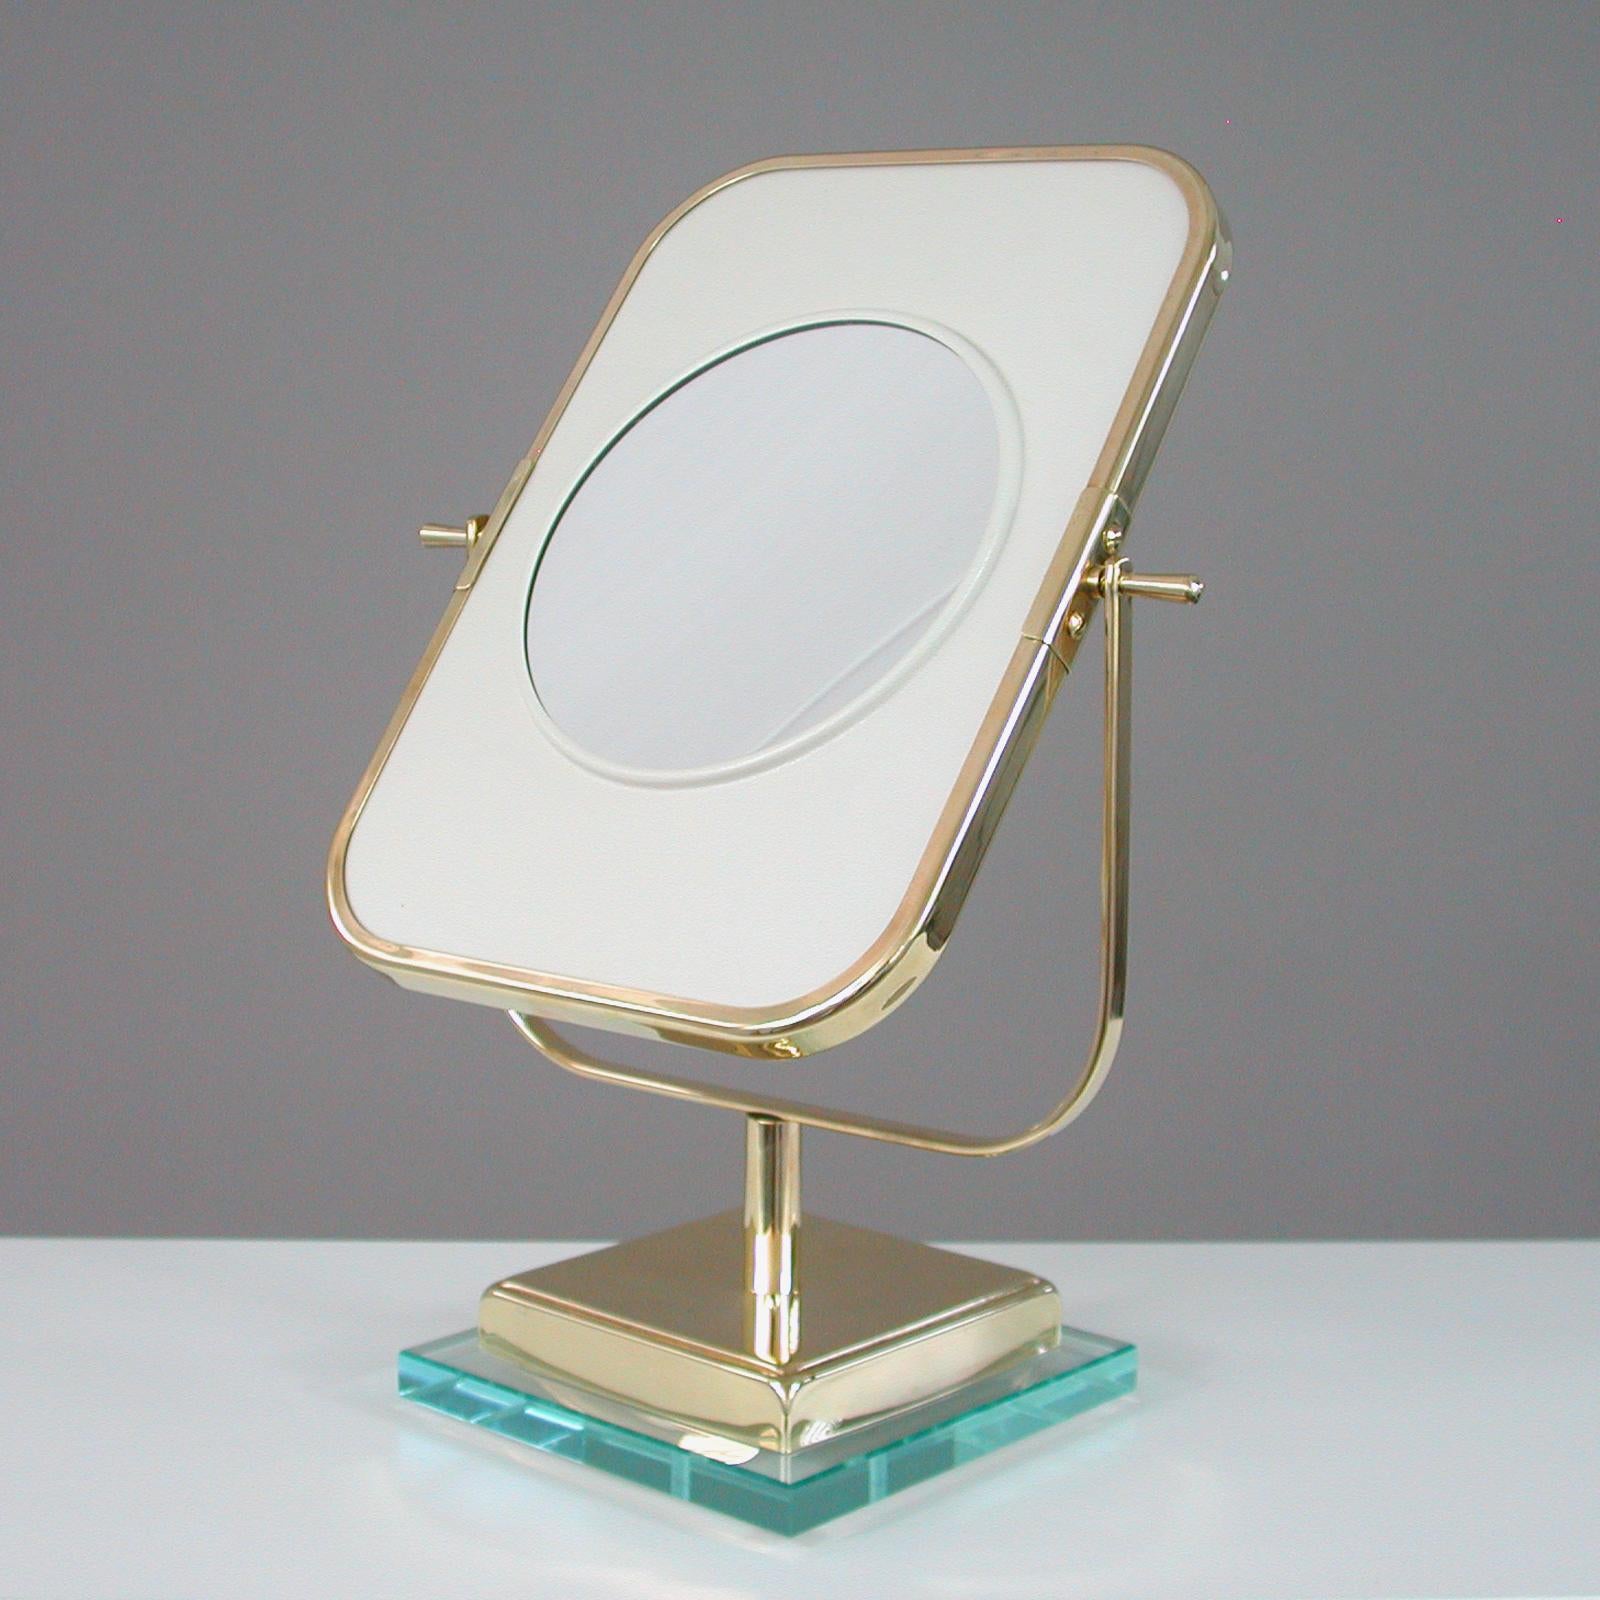 Italian Brass and Glass Double Sided Table Mirror 1950s, Fontana Arte Style 4